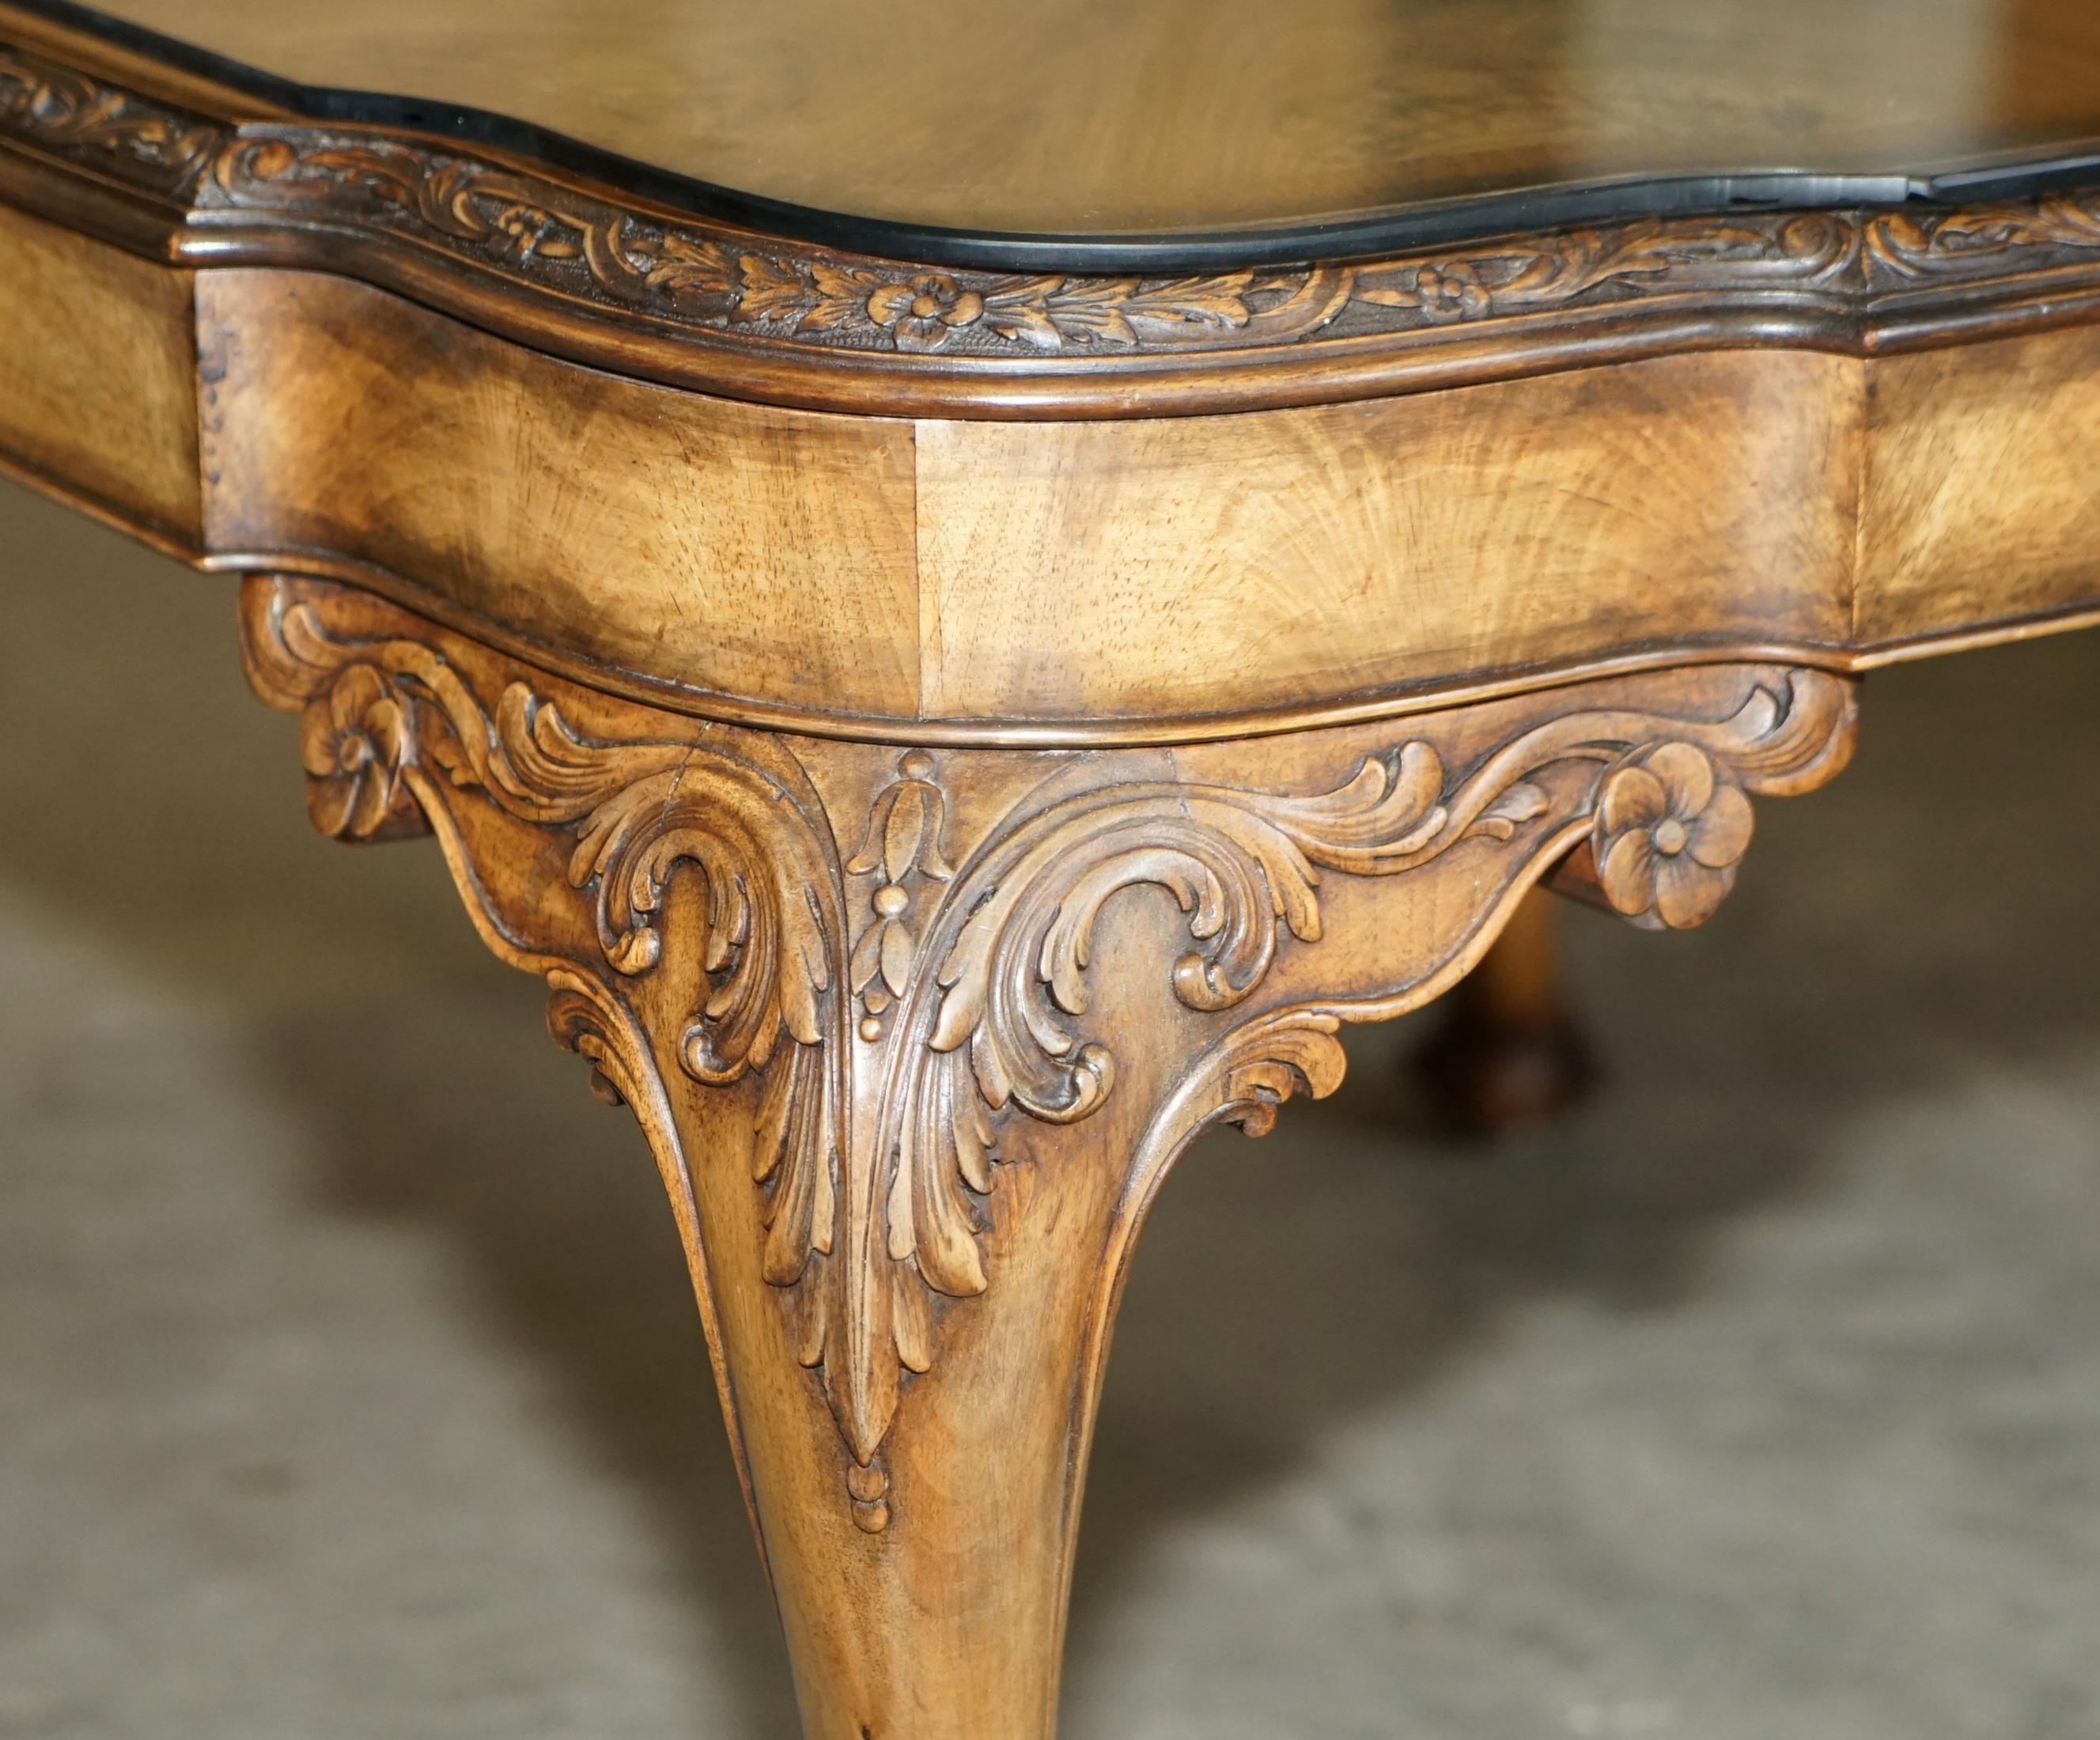 Hand-Crafted Exquisite Burr Walnut Coffee Cocktail Table with Ornately Carved Cabriole Legs For Sale